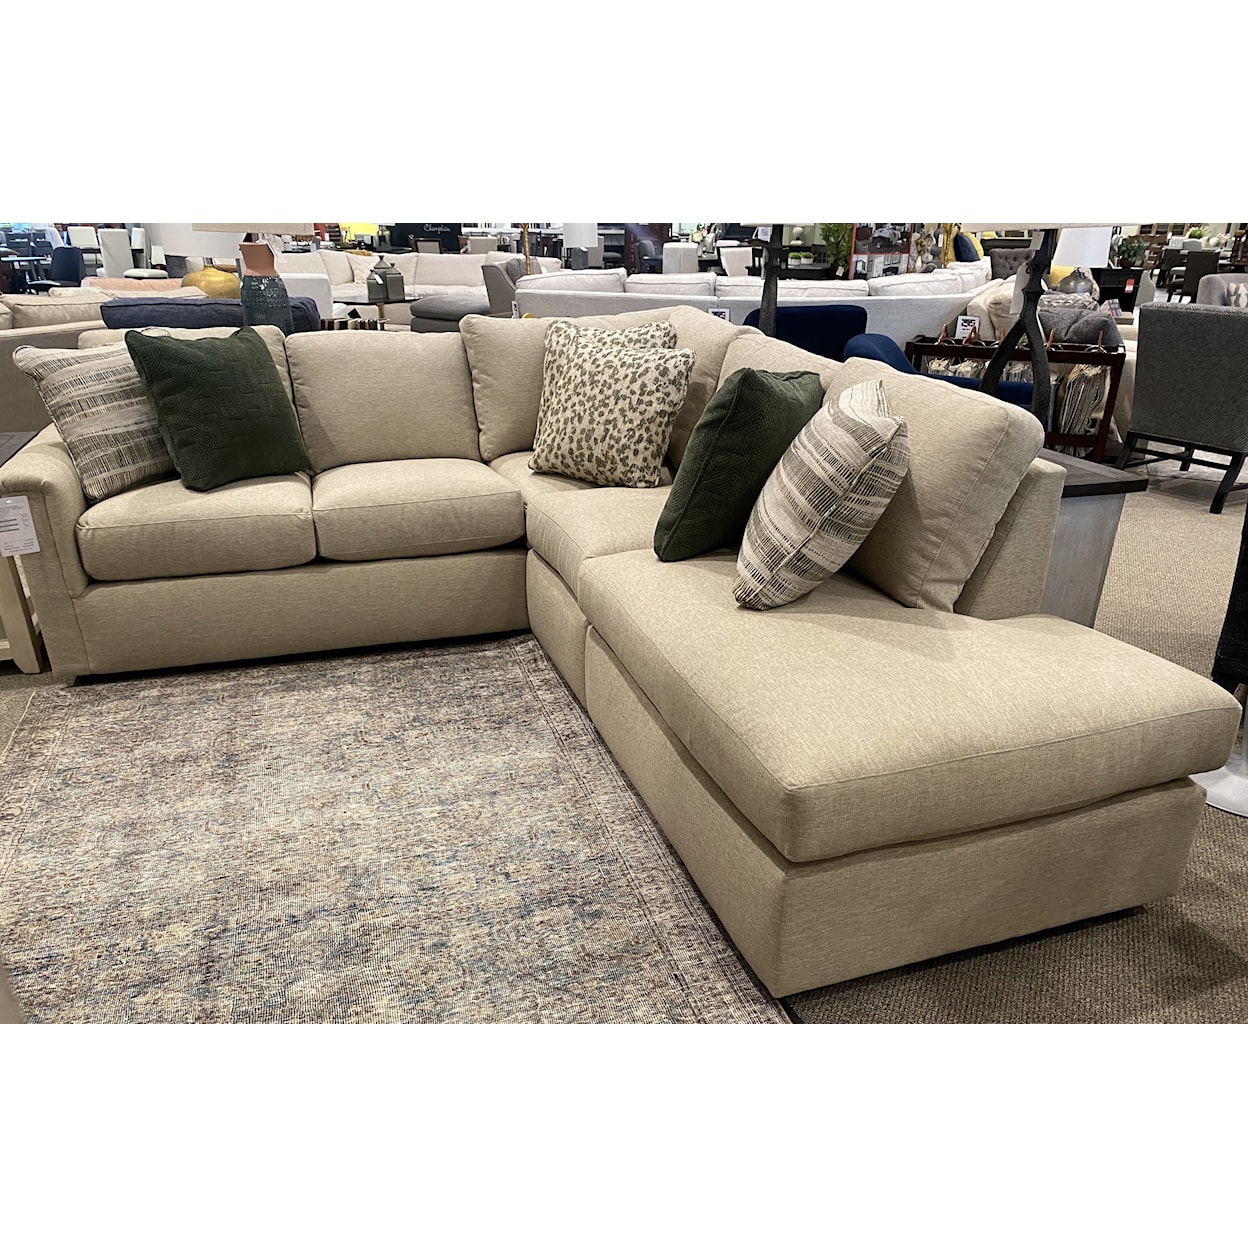 Craftmaster Hudson Sectional